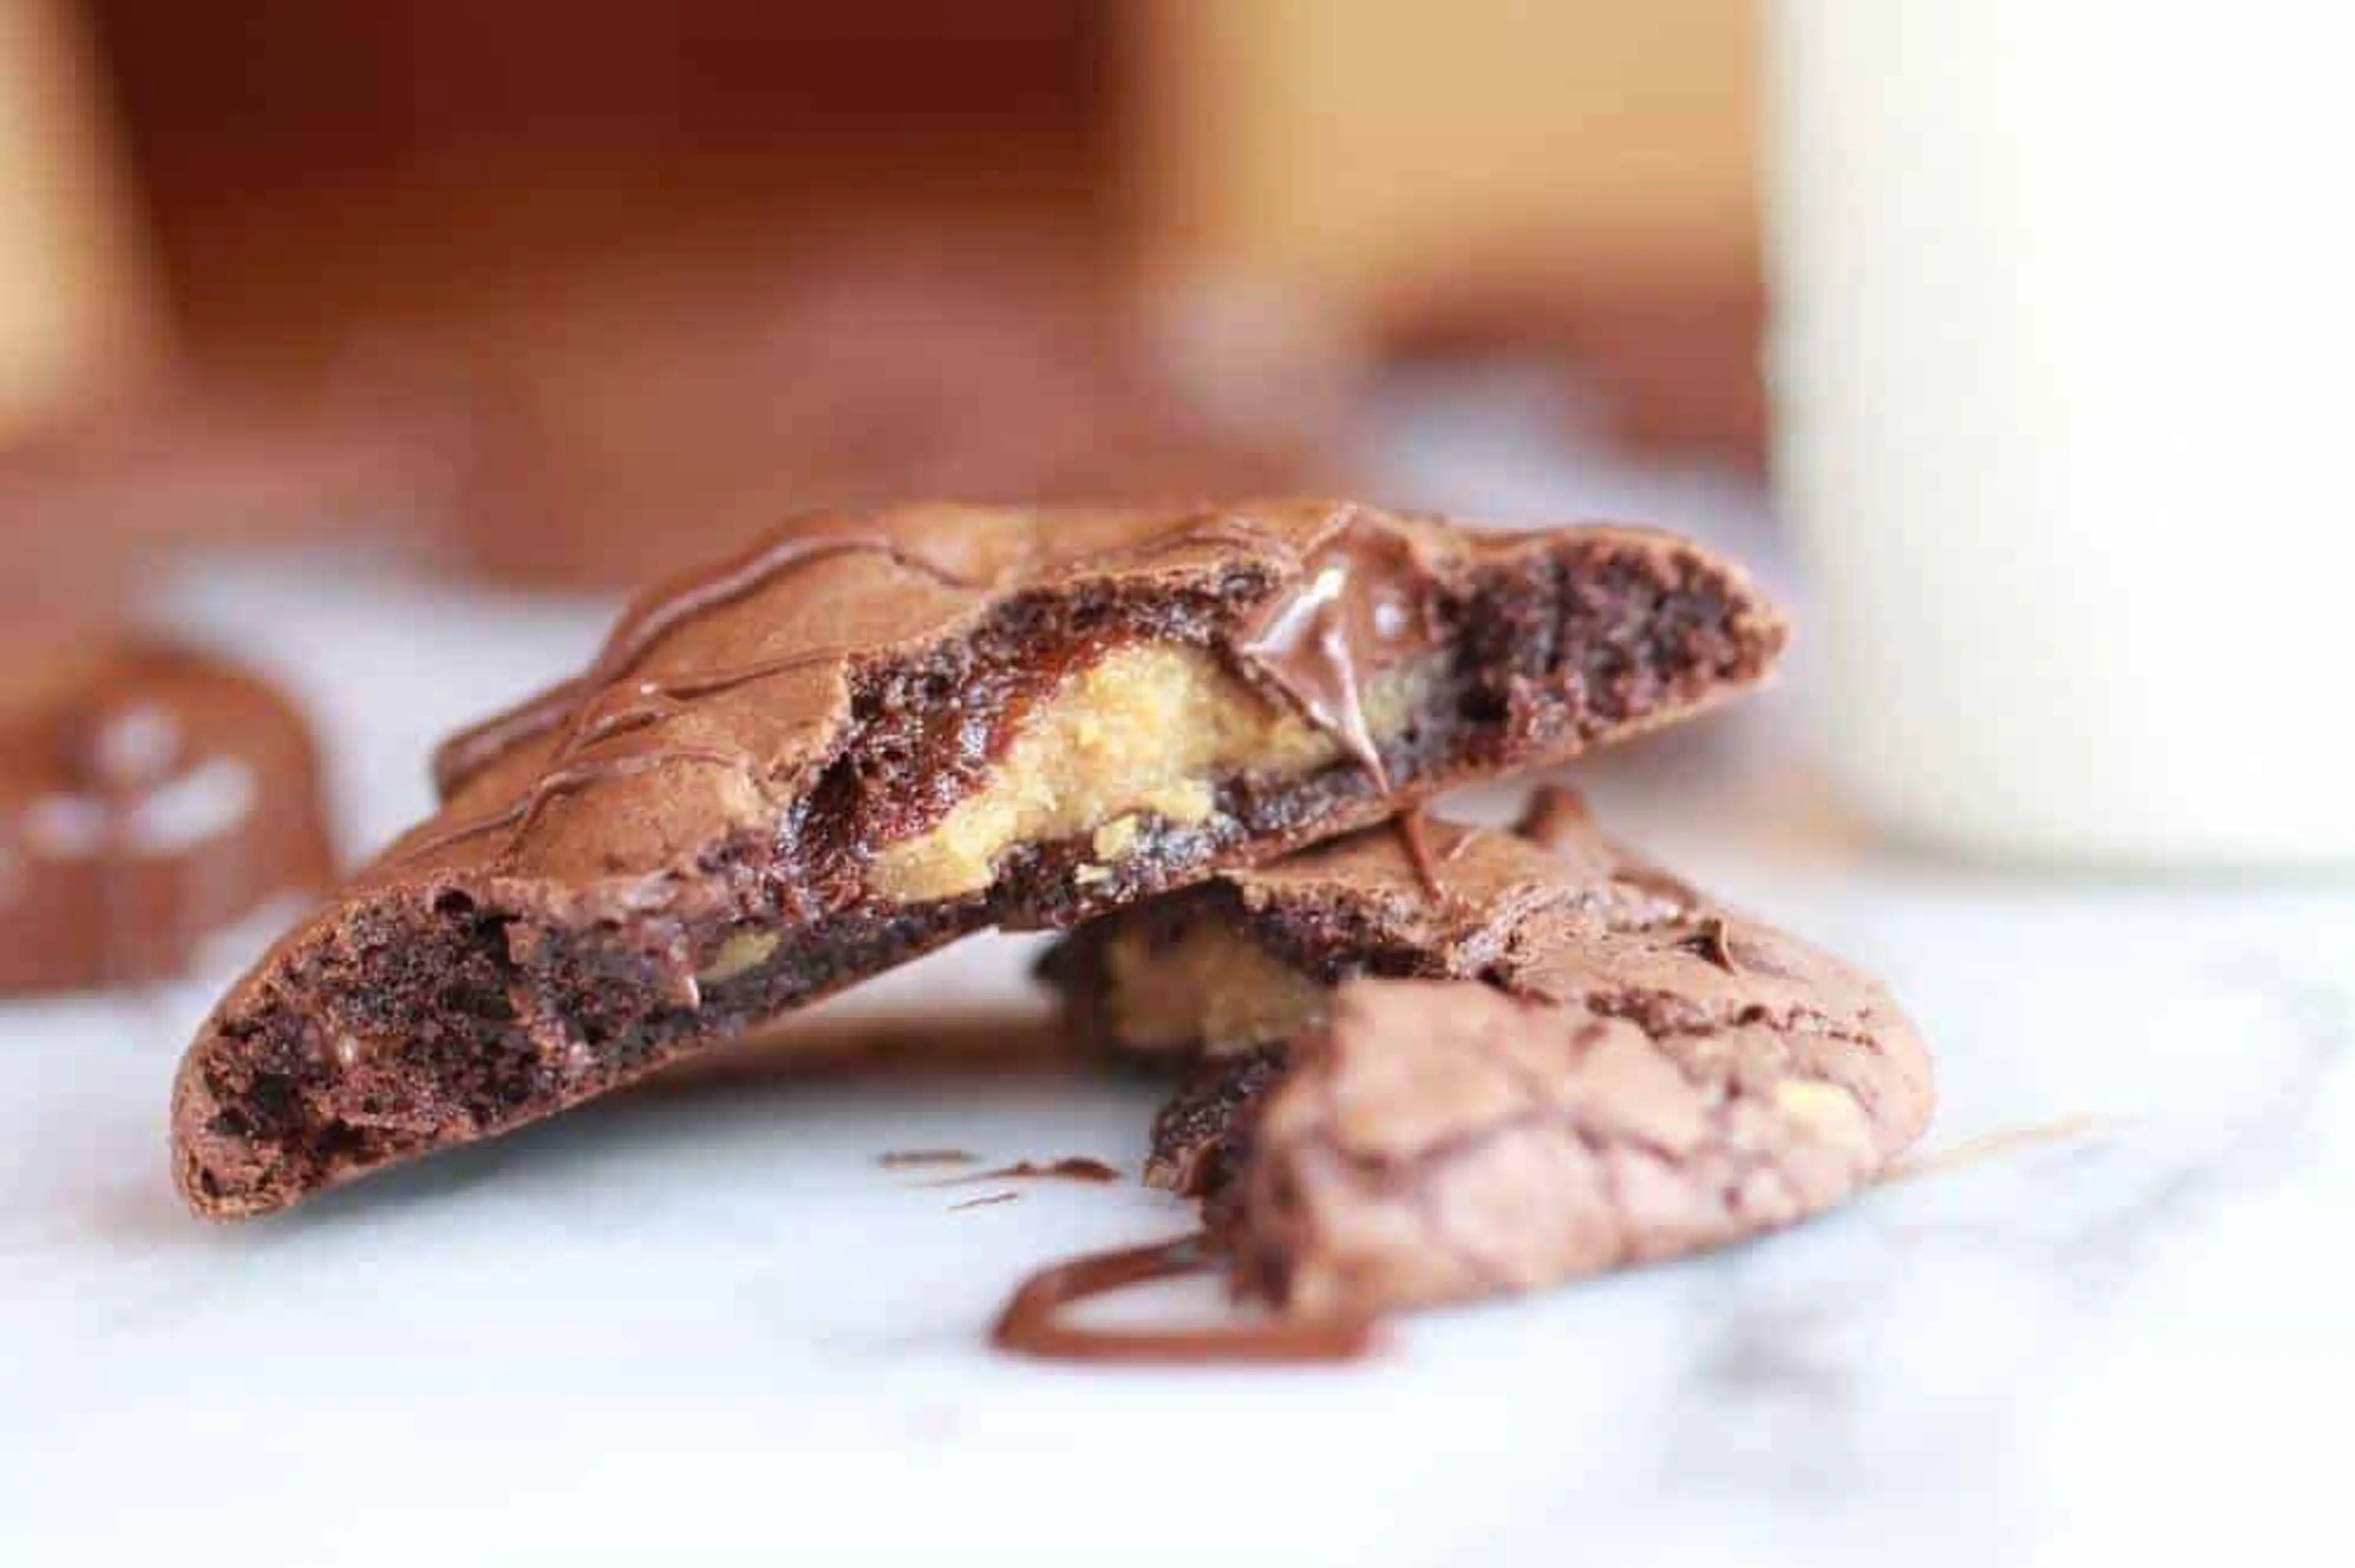 Double Chocolate Truffle Cookies stuffed with Peanut Butter